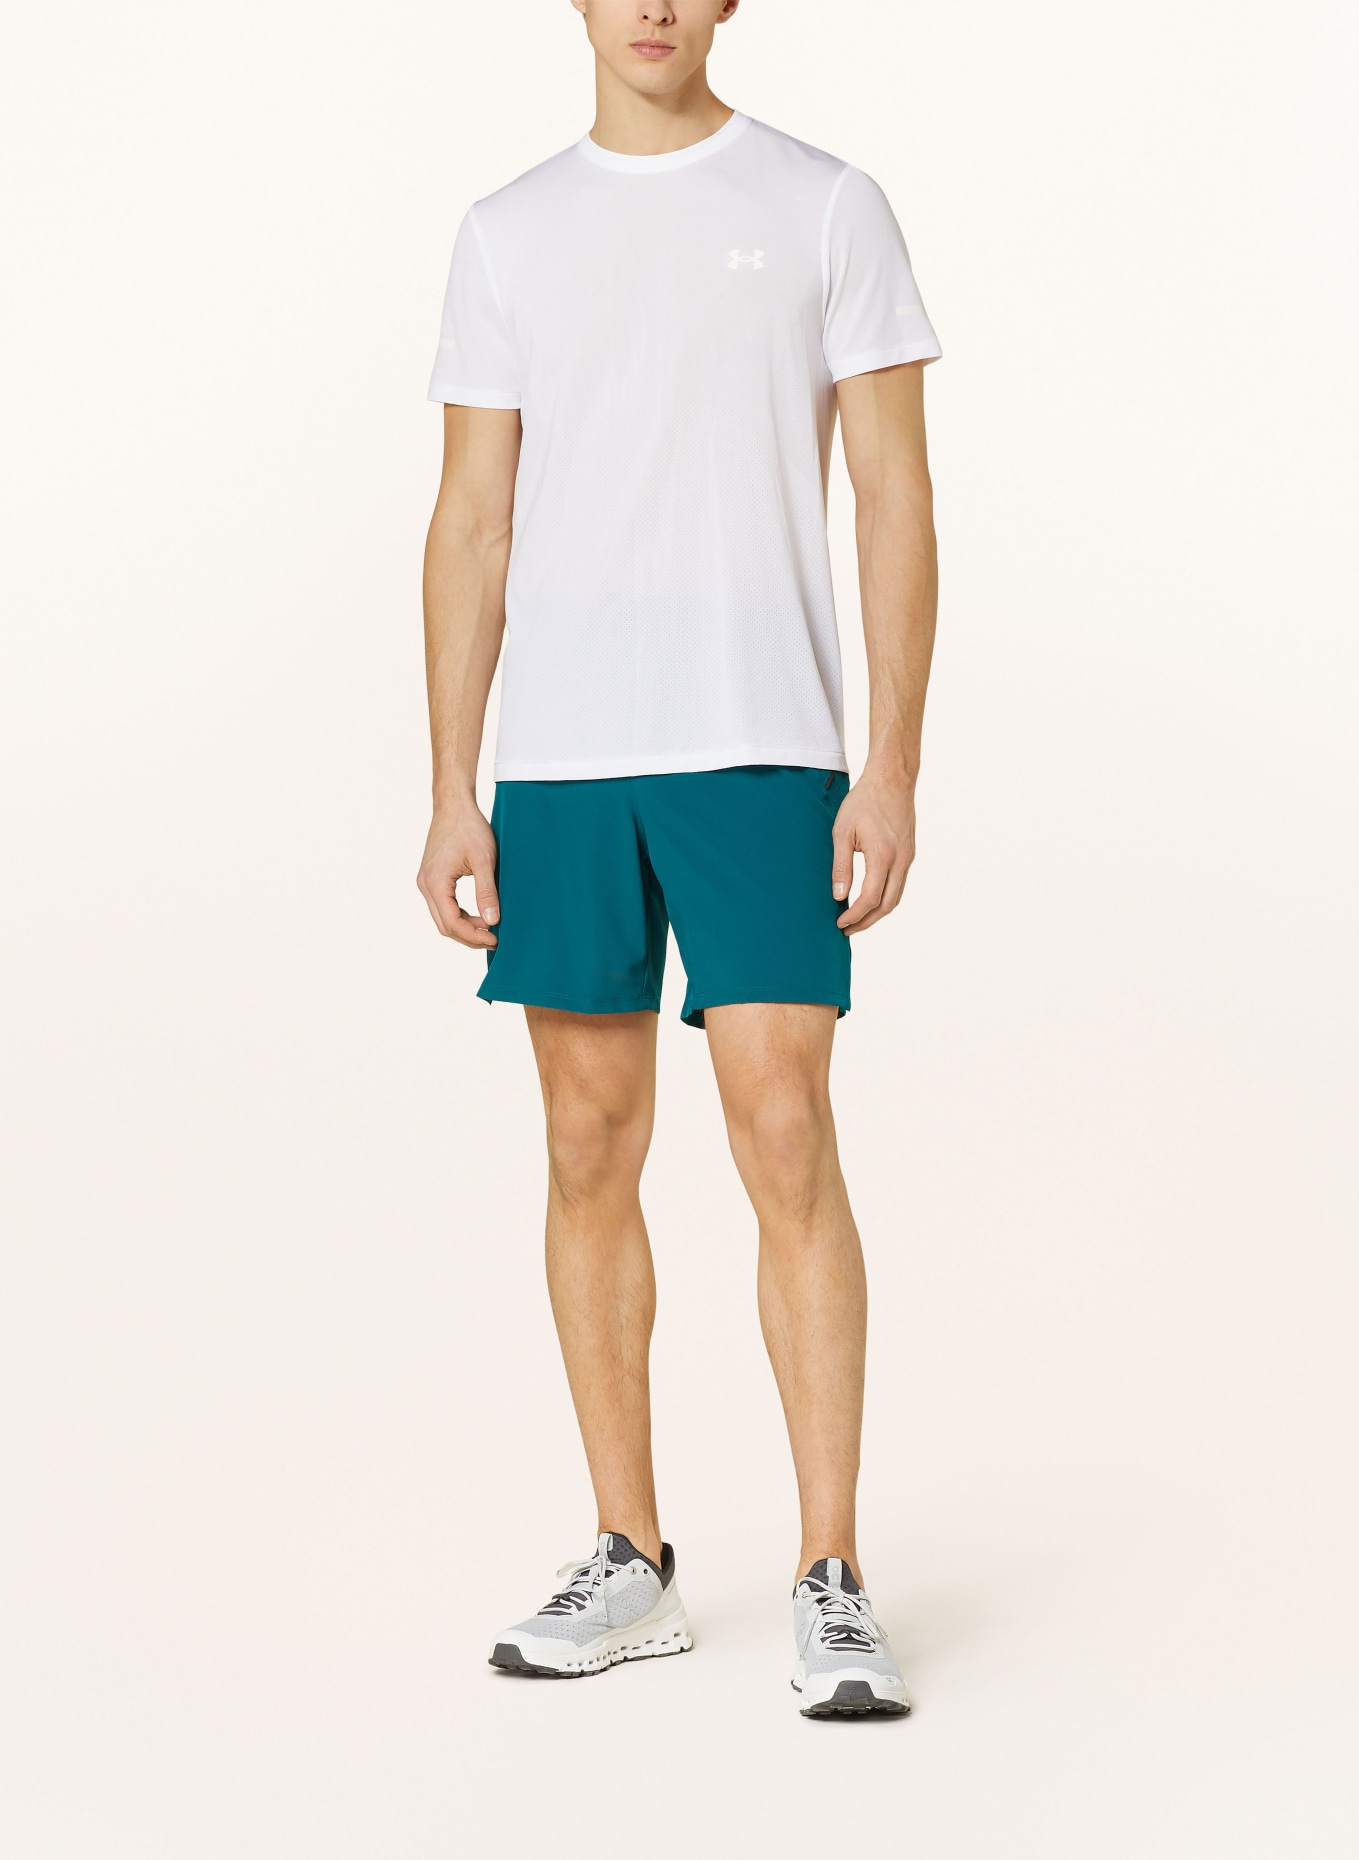 UNDER ARMOUR Running shirt UA SEAMLESS STRIDE, Color: WHITE (Image 2)